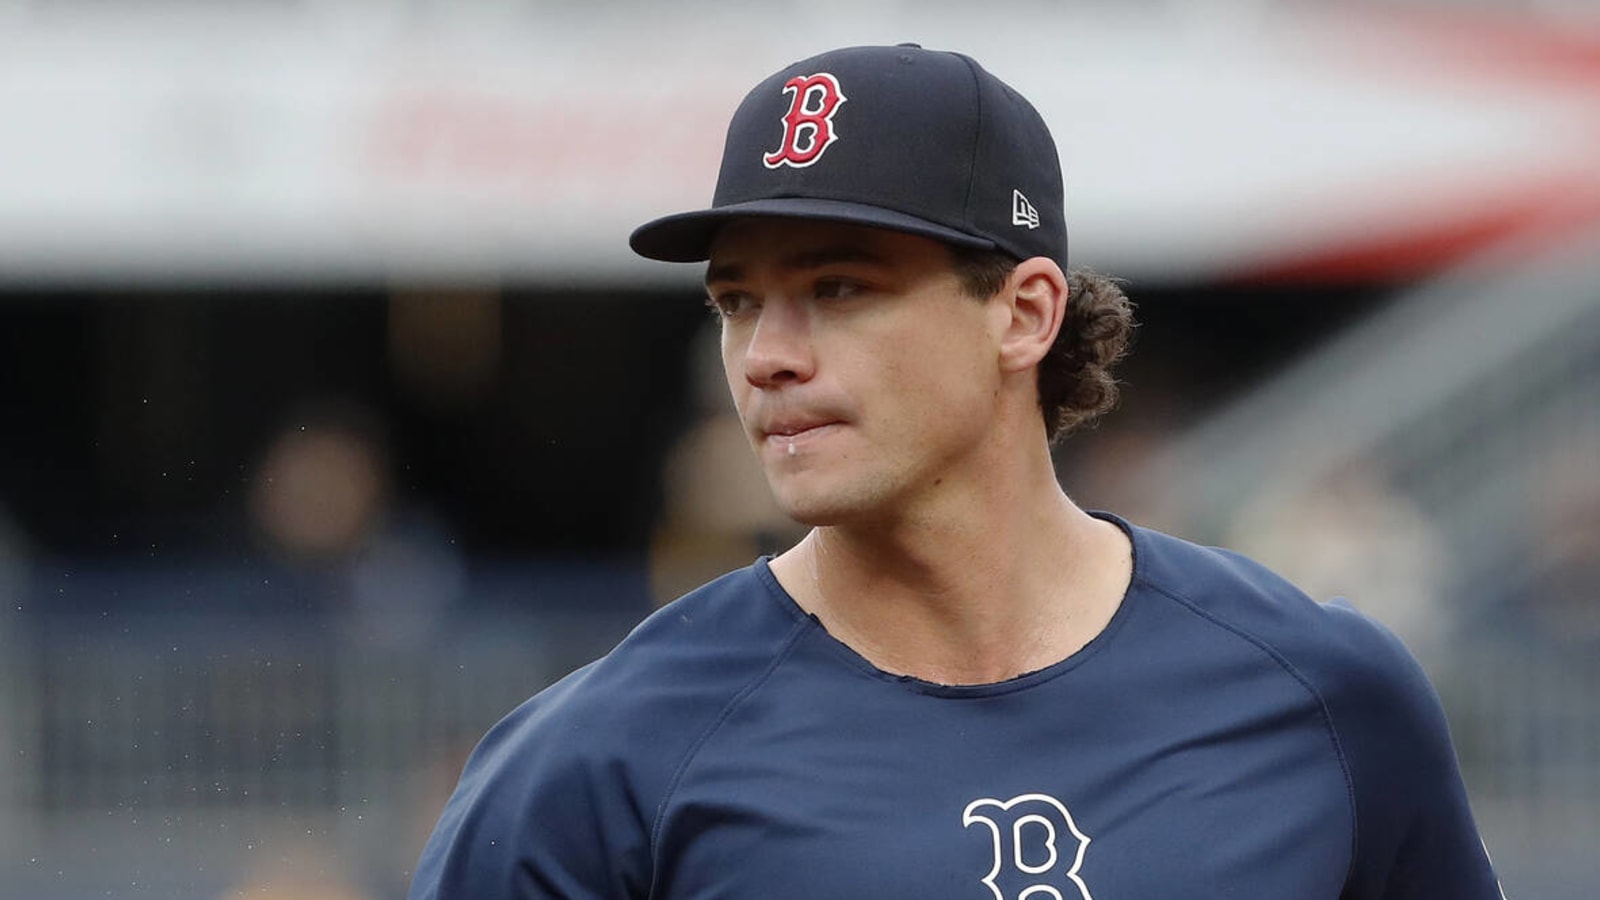 Dalbec has one last chance to prove himself for the Red Sox